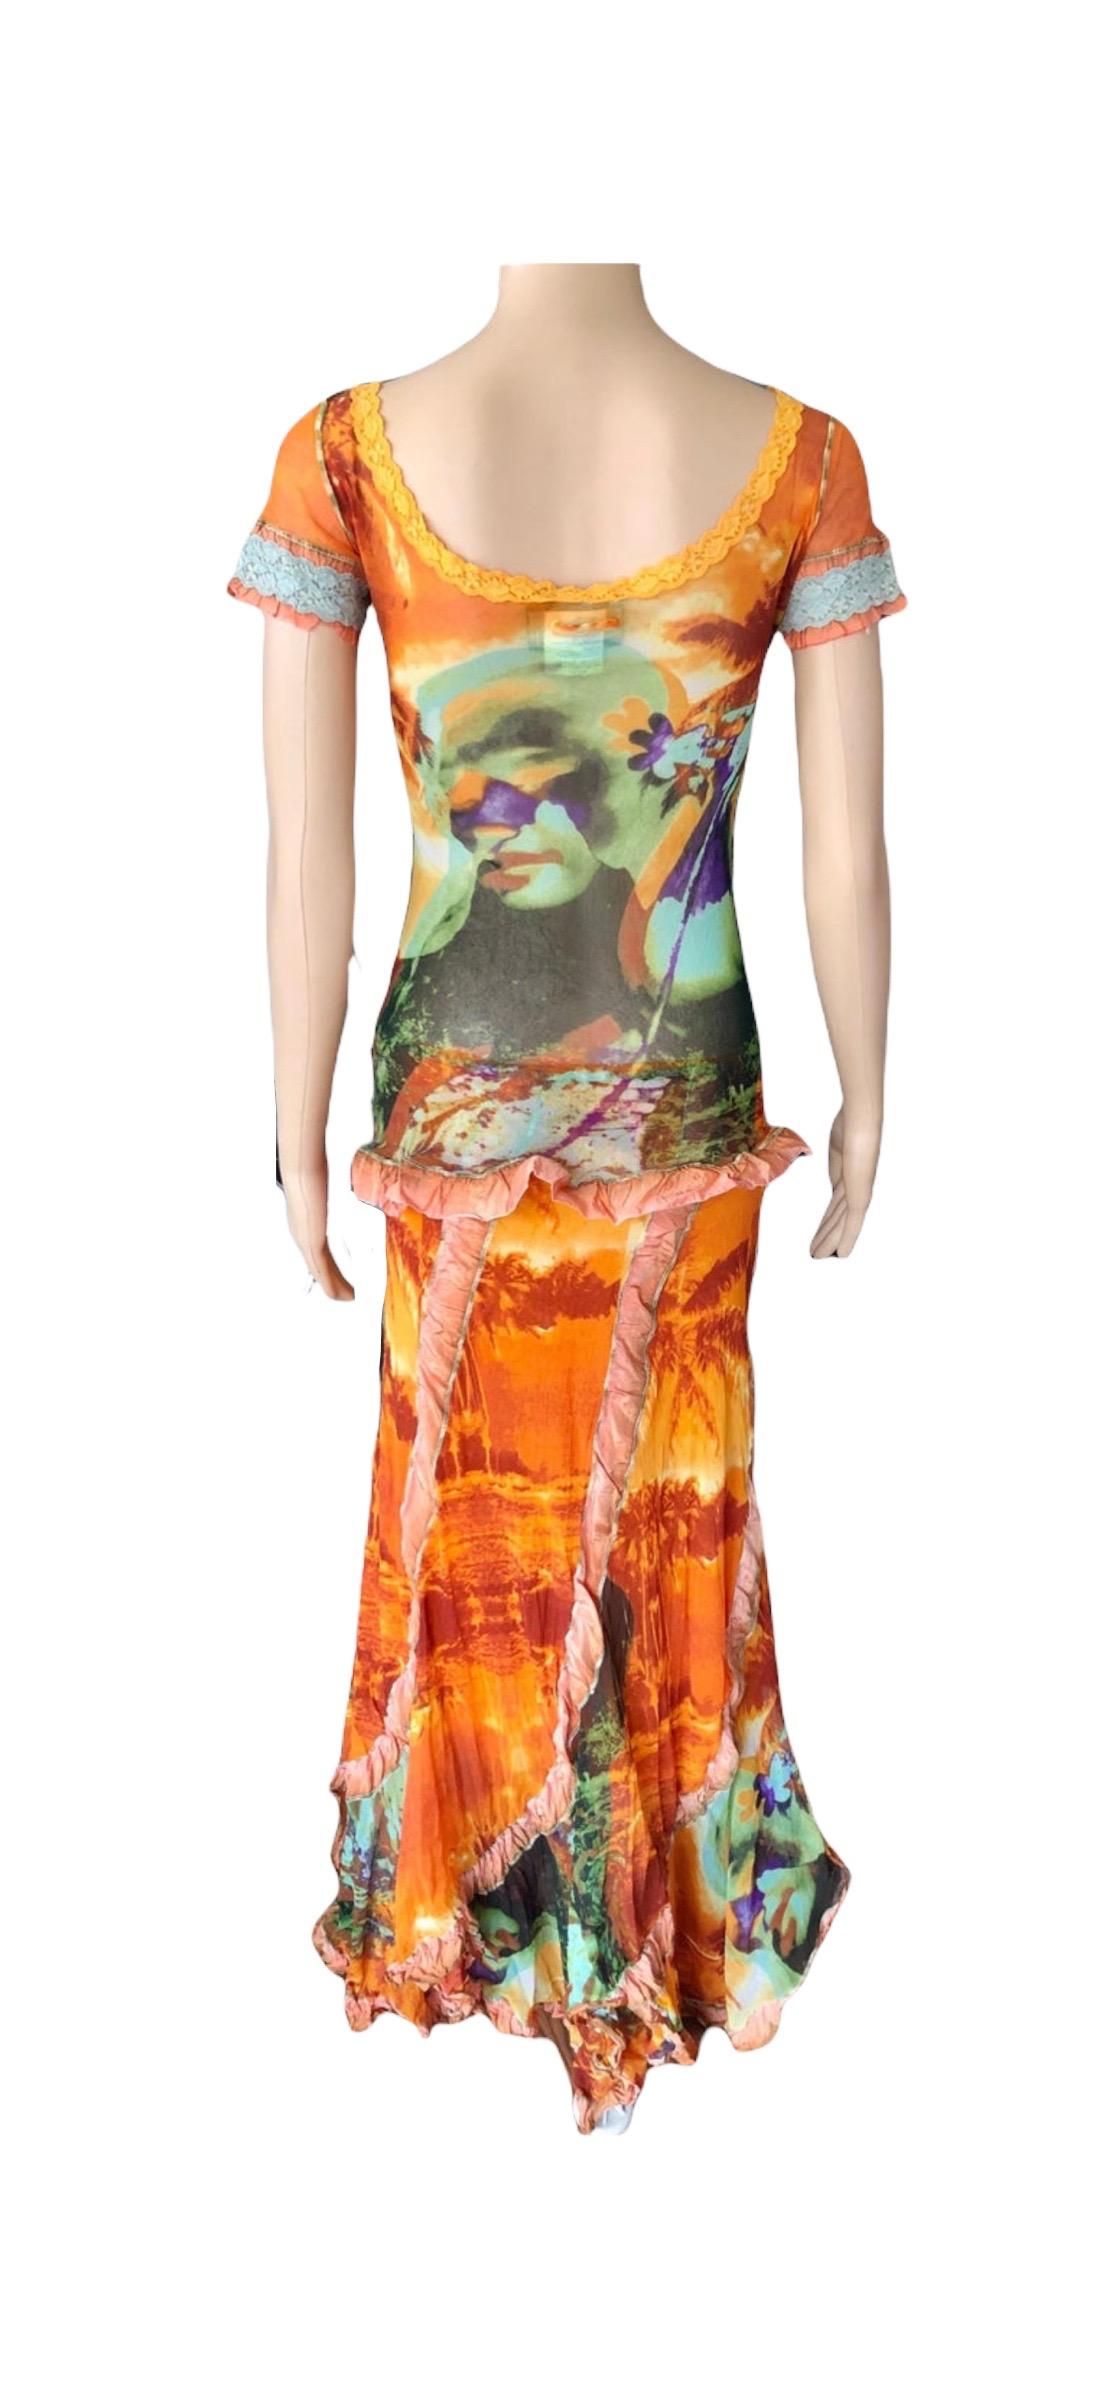 Jean Paul Gaultier S/S 2000 Abstract Psychedelic Top &Skirt Ensemble 2 Piece Set For Sale 12